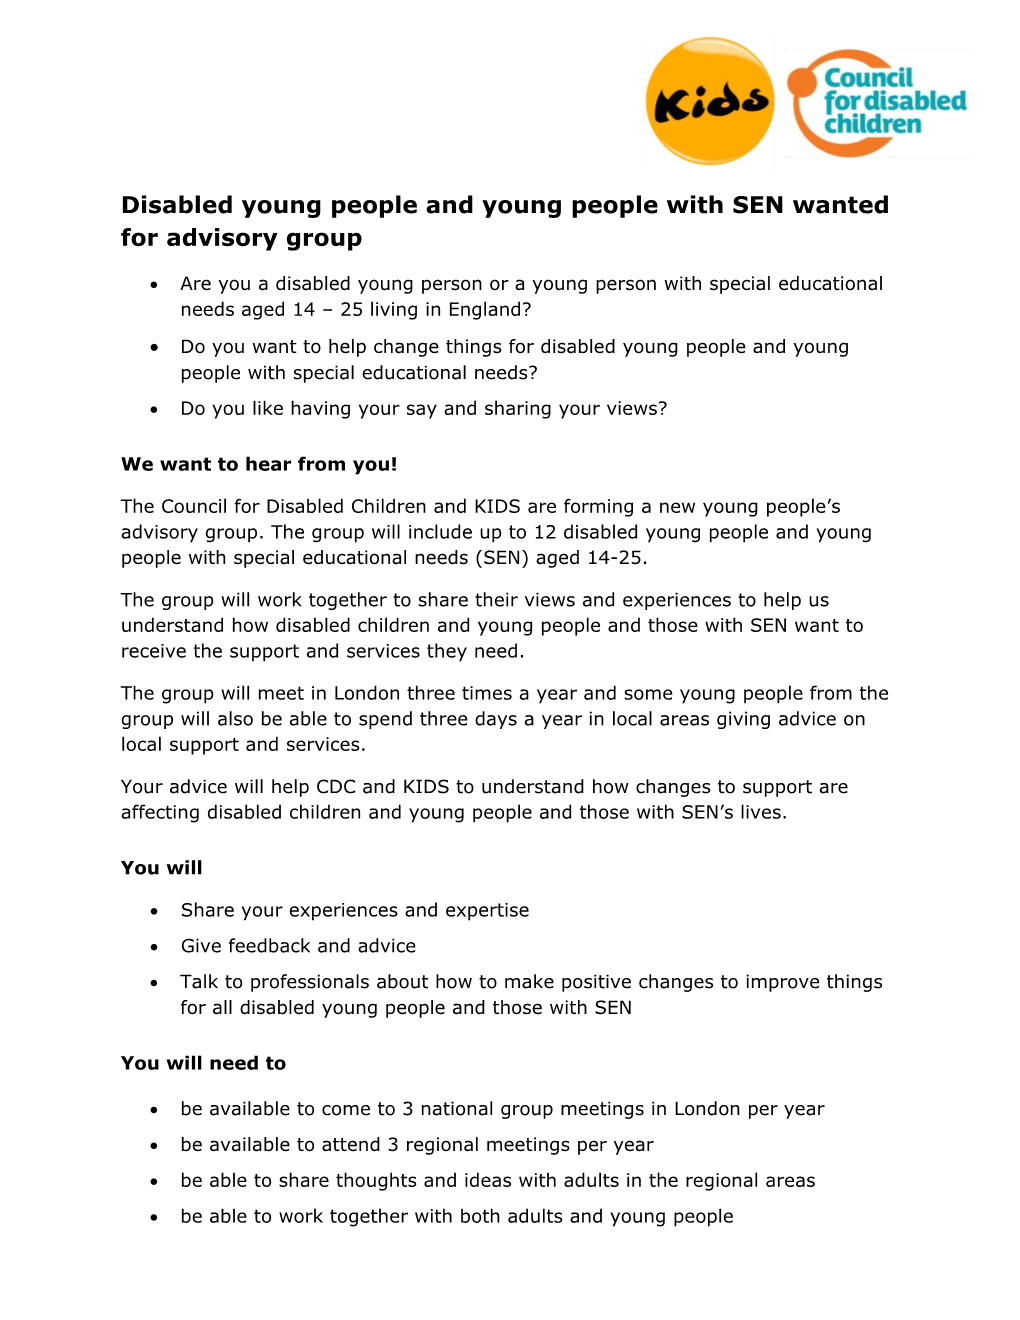 Disabled Young People and Young People with SEN Wanted for Advisory Group